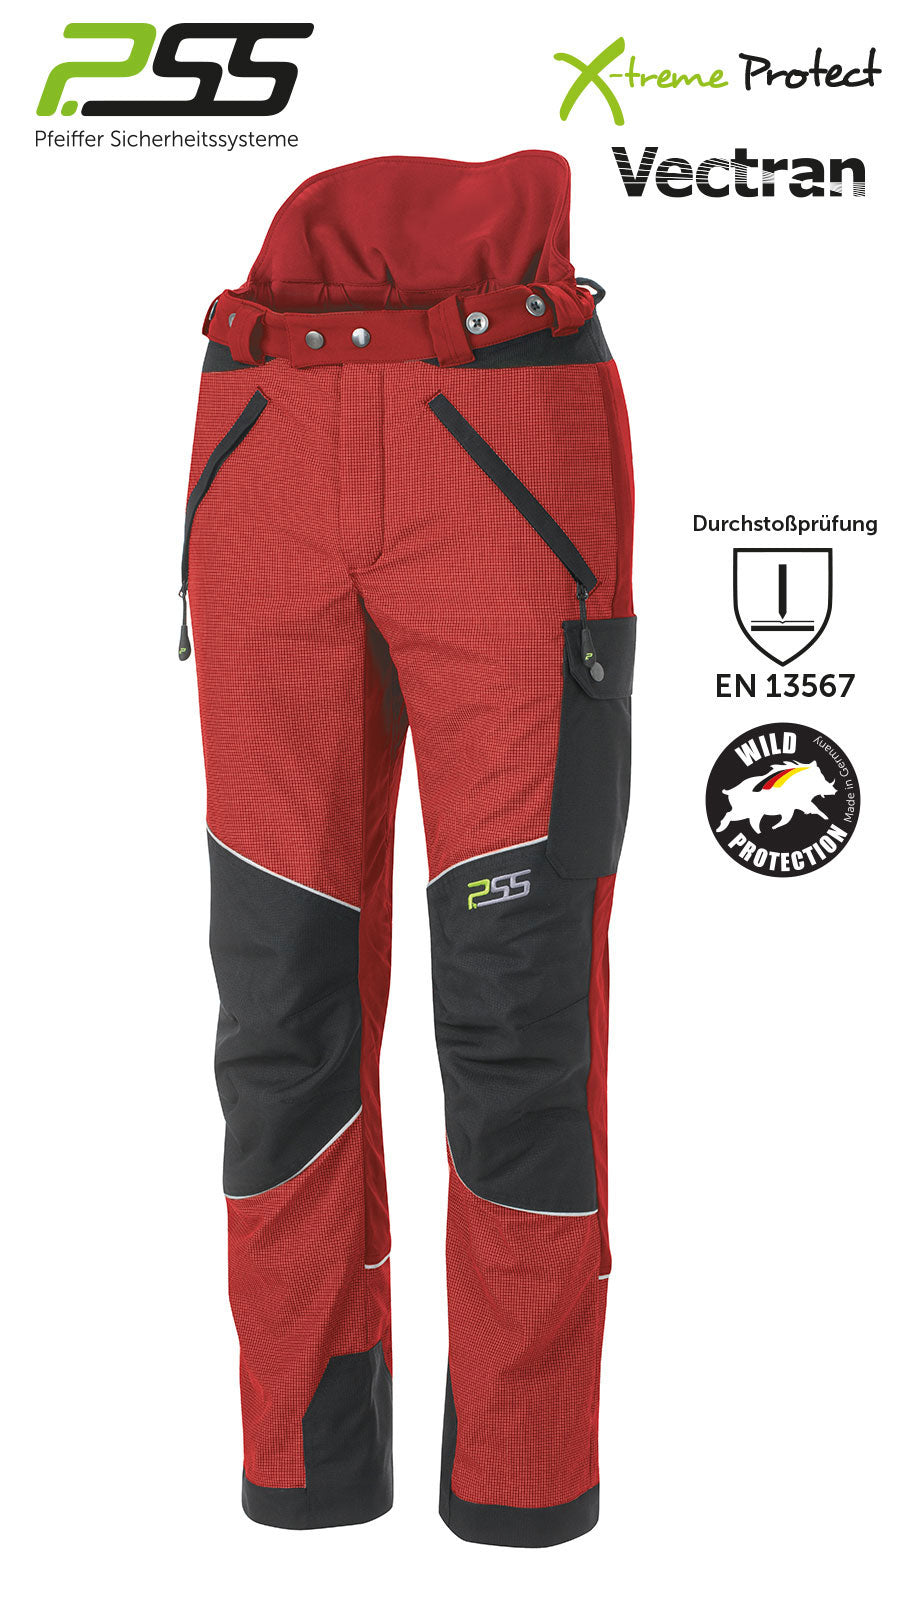 PSS X-treme Protect Wild boar hunt protection pants red